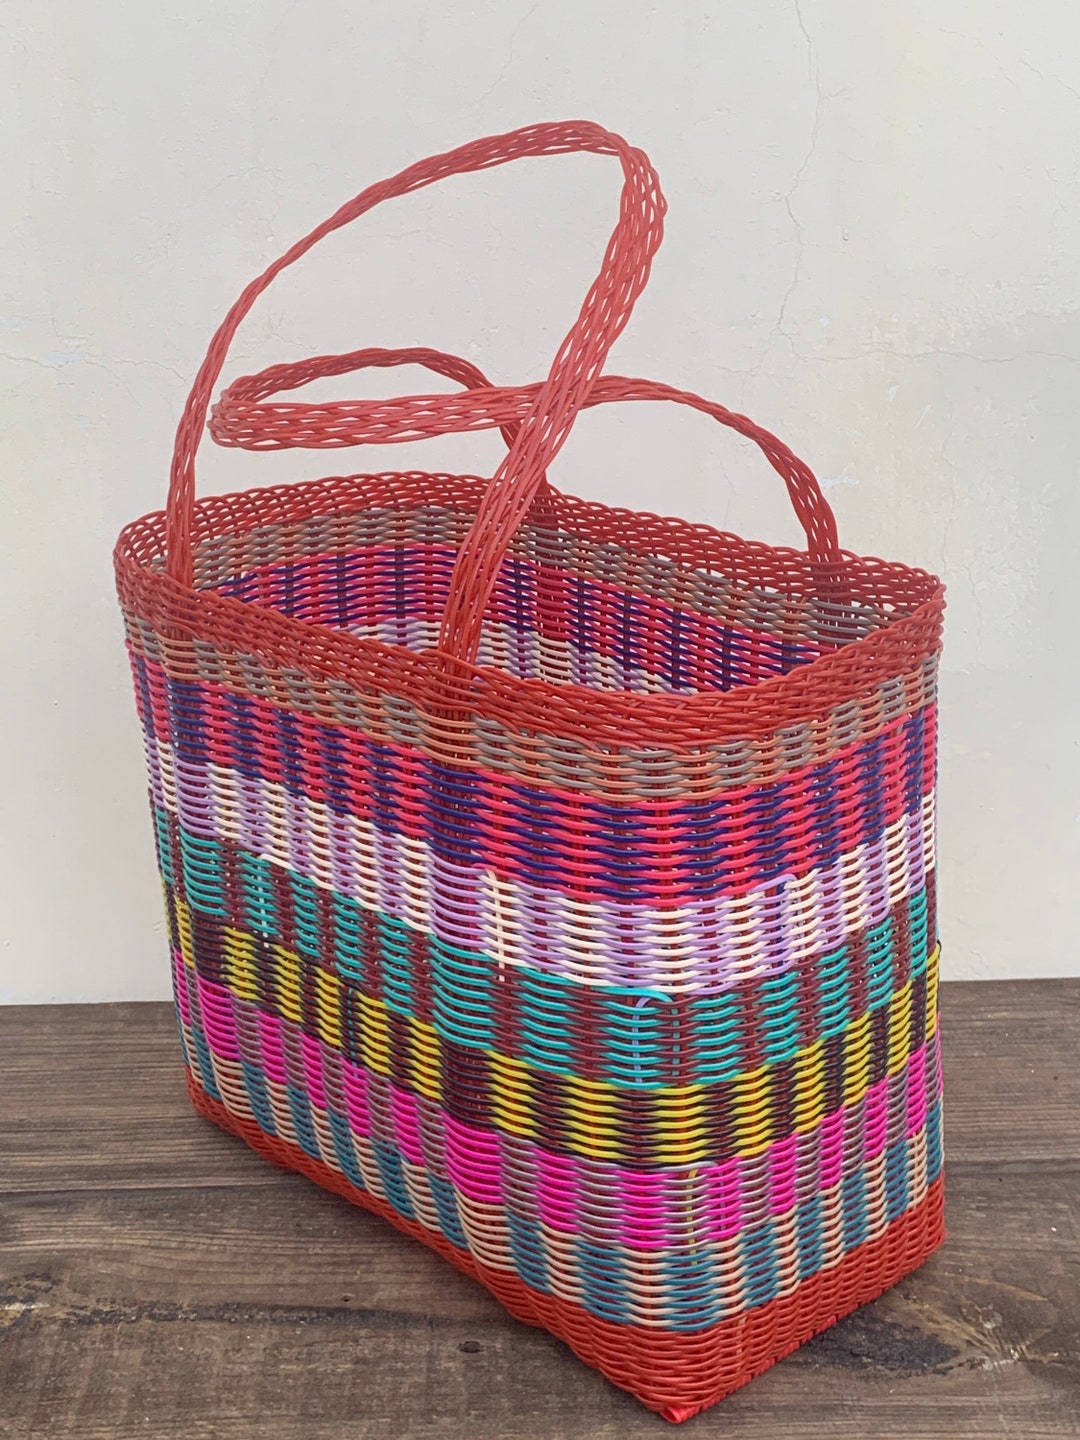 Red Mosaic Market Beach Picnic Grocery Basket Very Resistant - Etsy